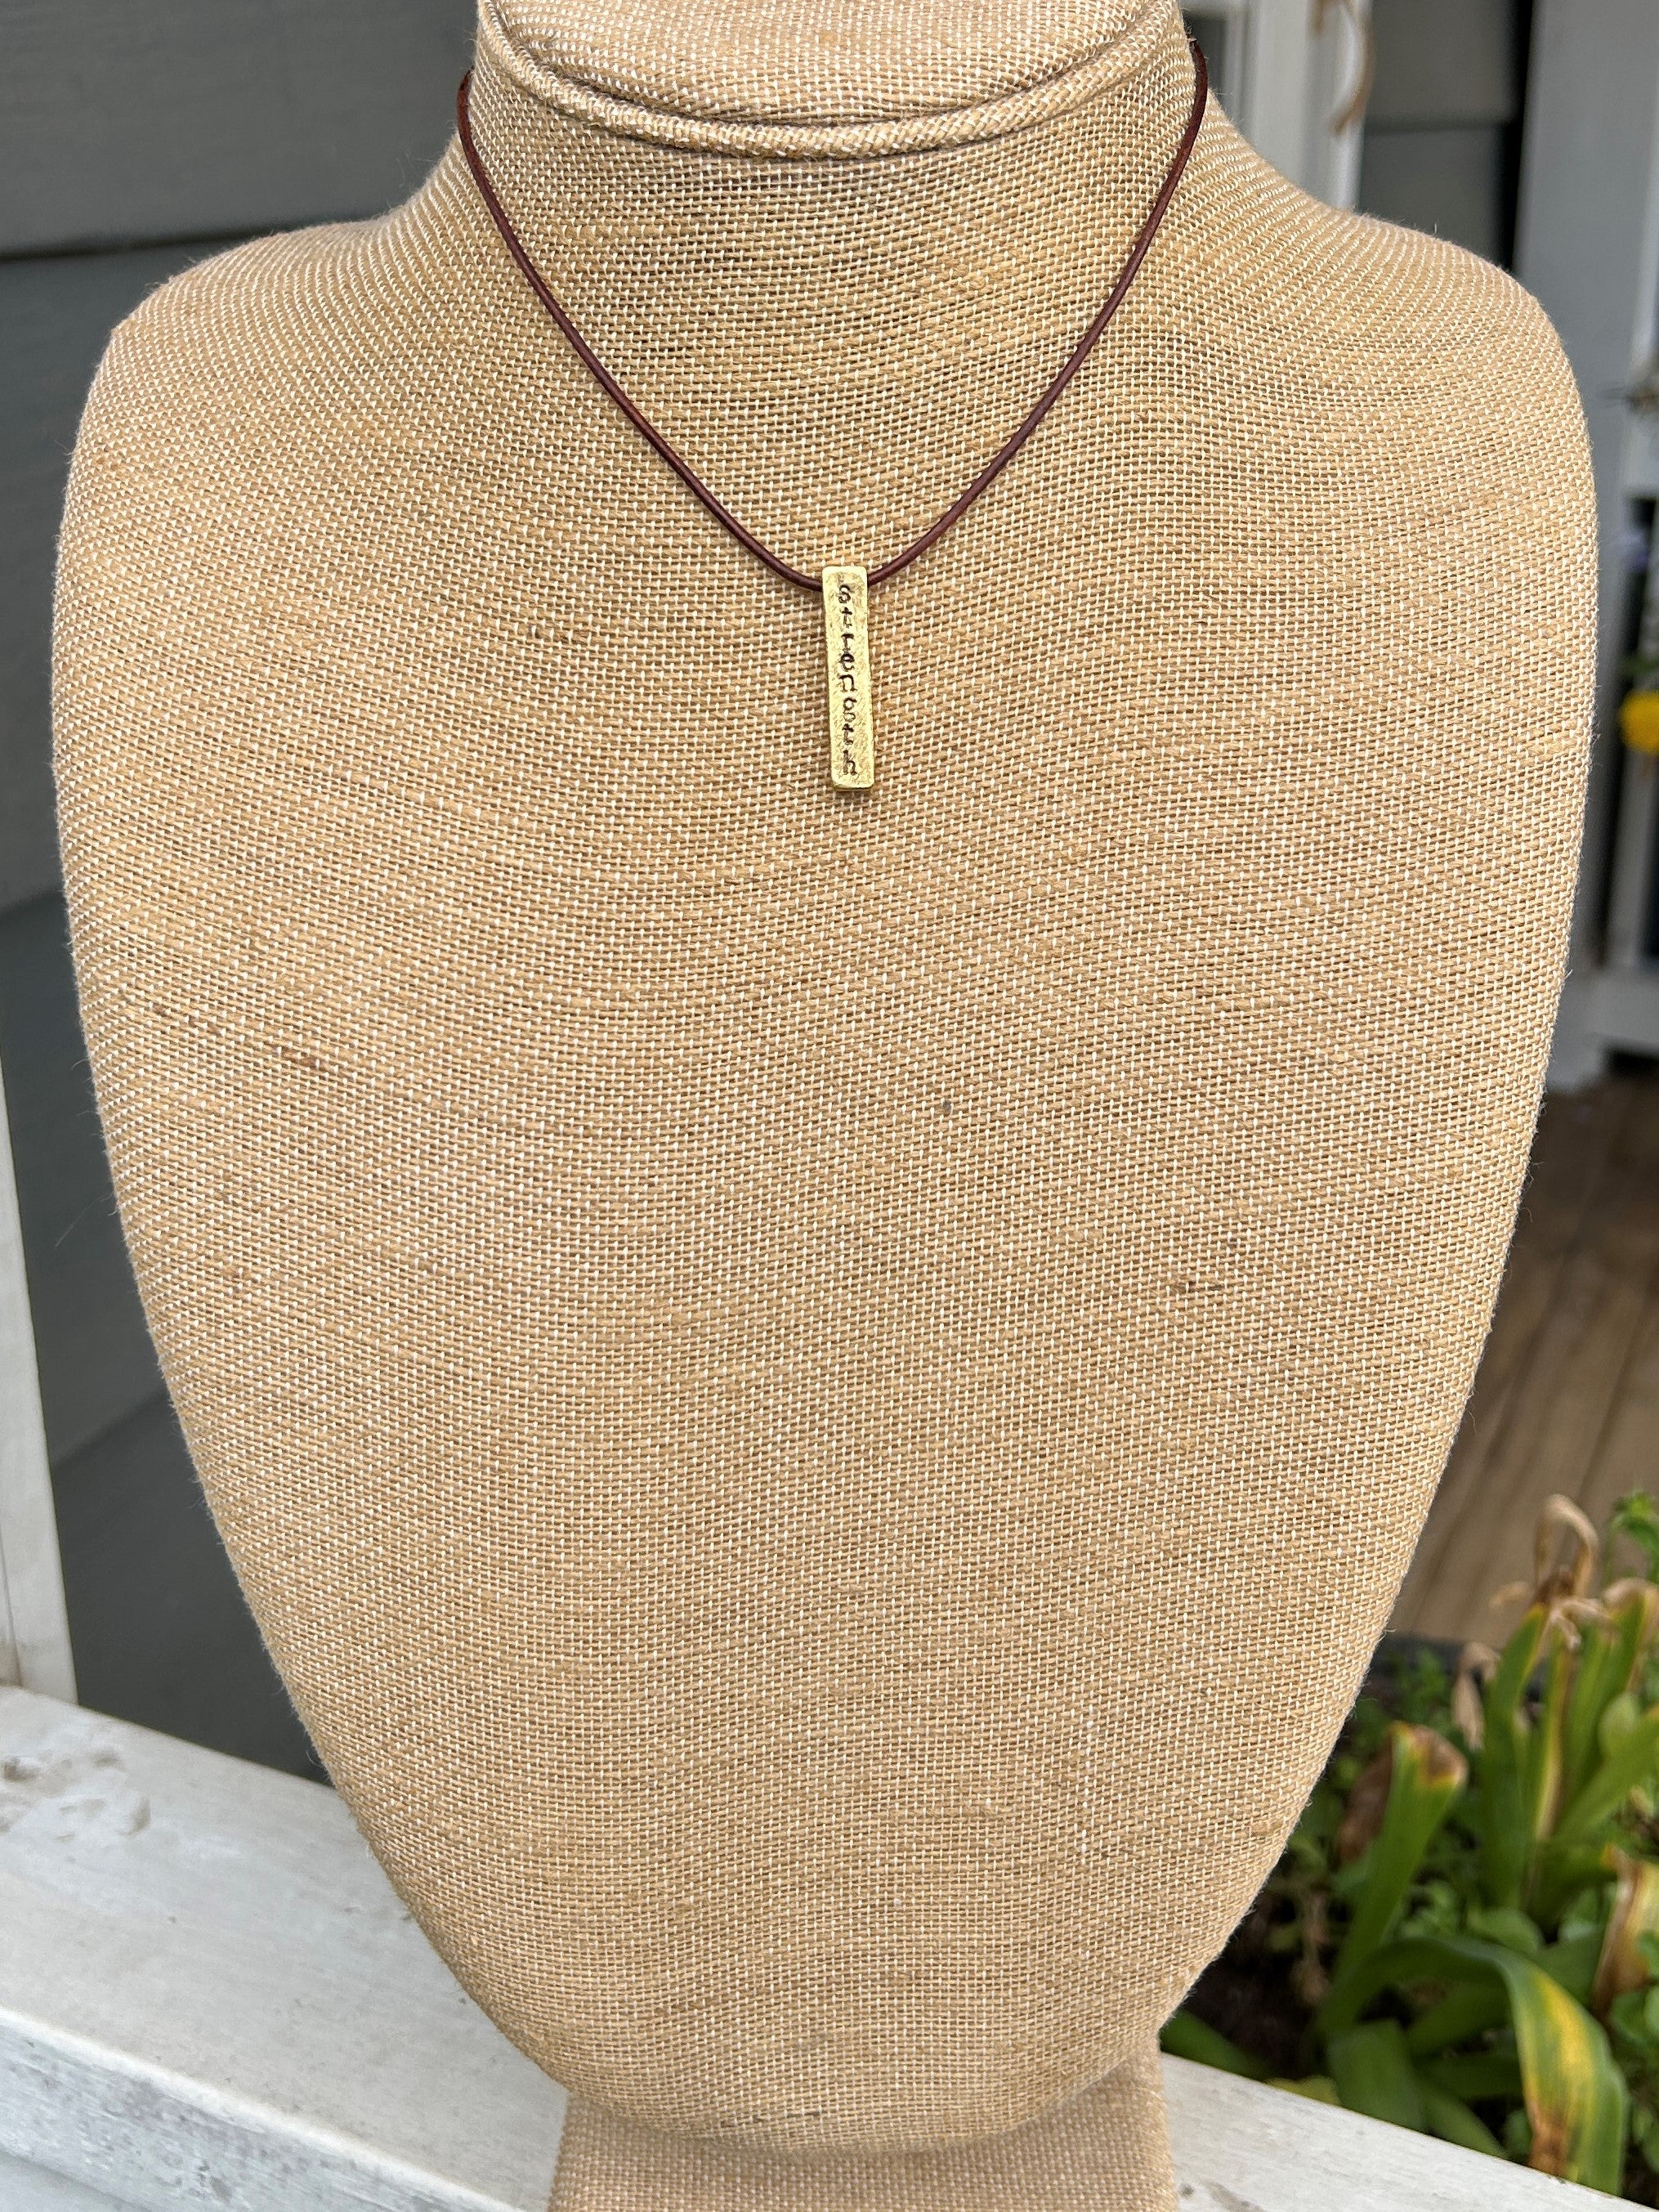 Leather Necklace with Bar Drop ("Strength")